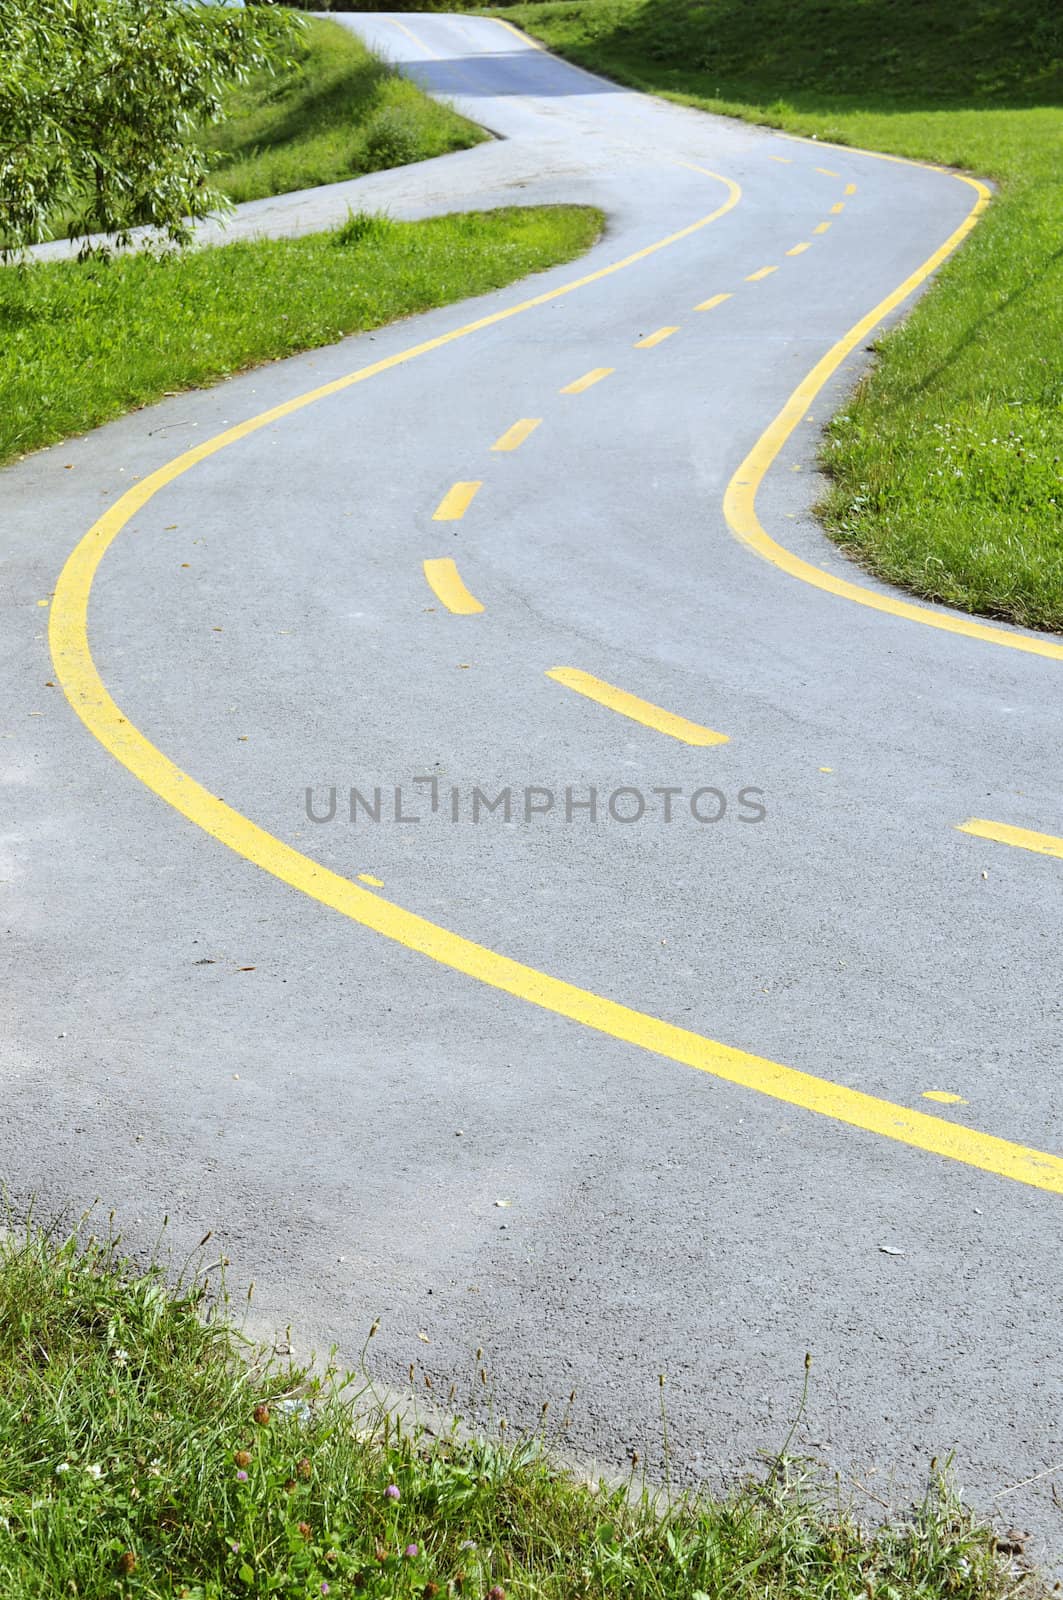 Curved bicycle road with yellow paint